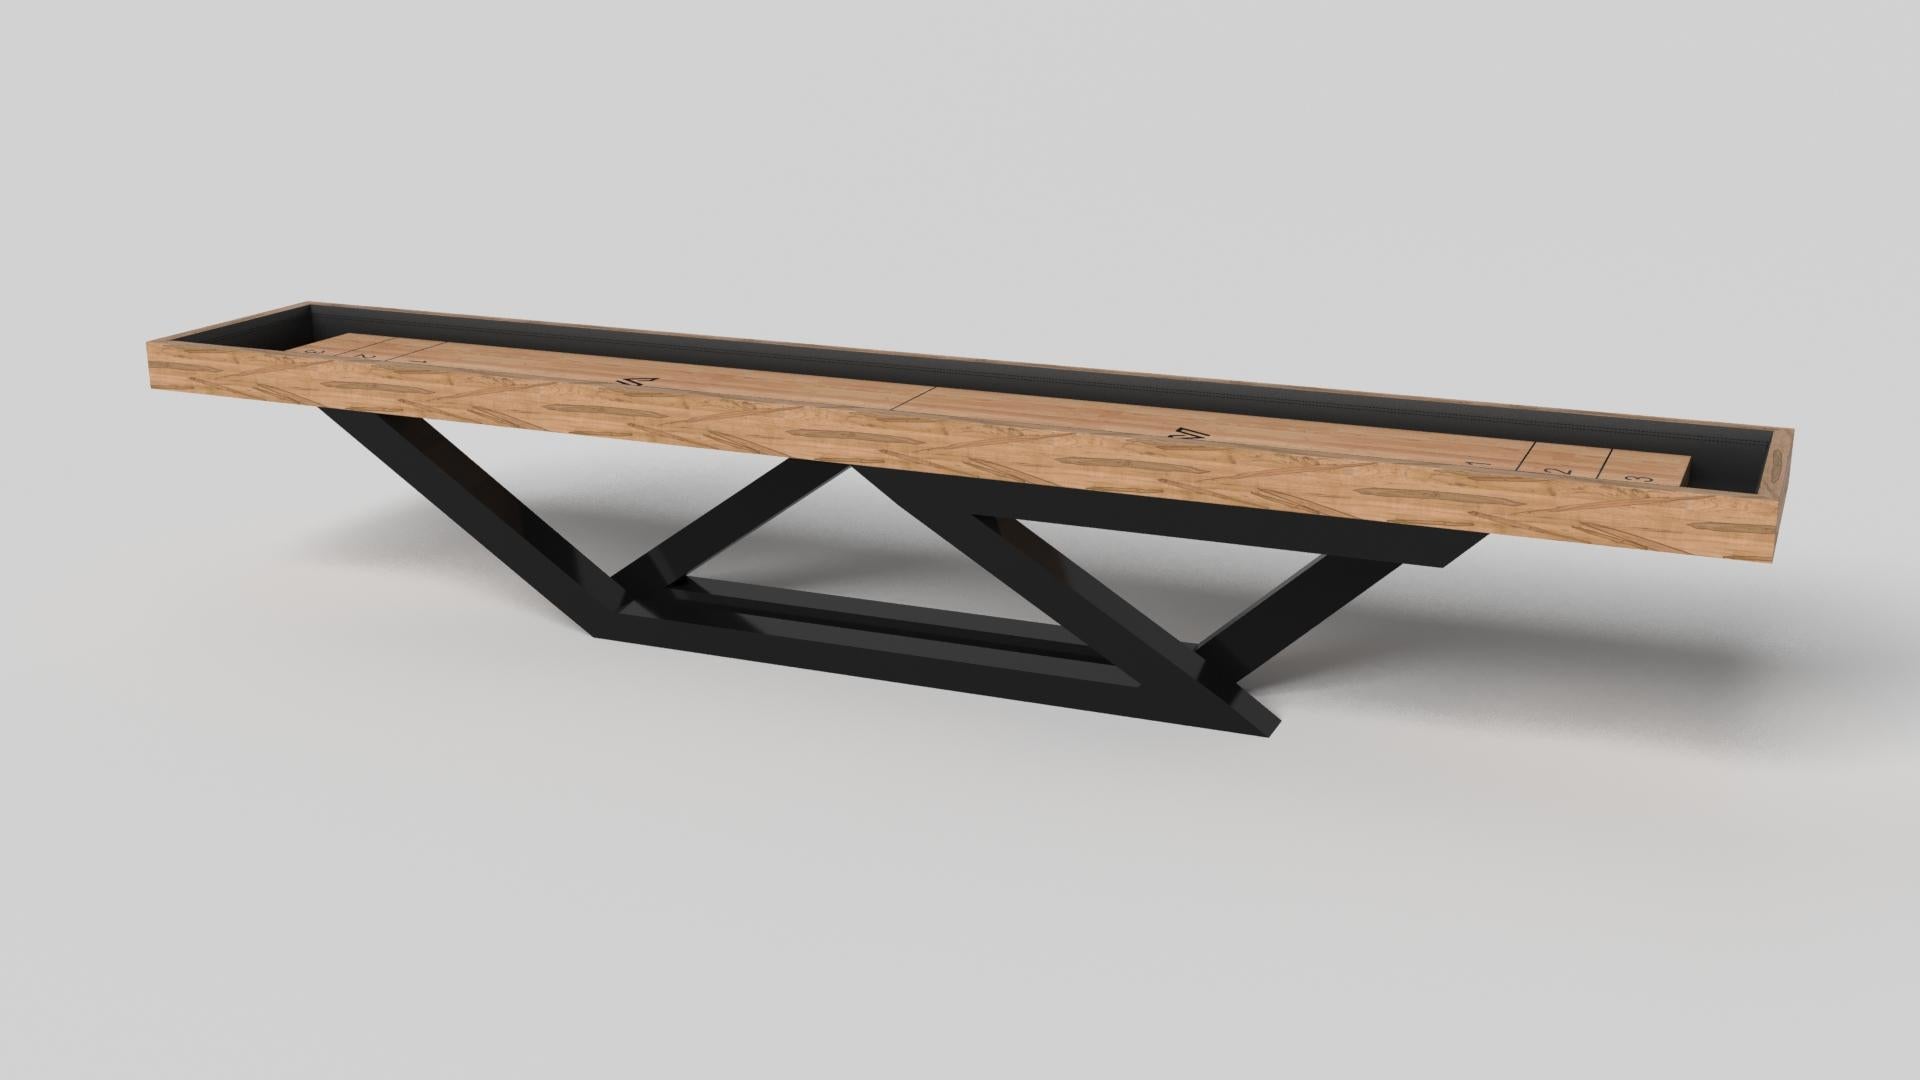 A contemporary composition of clean lines and sleek edges, the Trinity shuffleboard table in black chrome with red accent is an elegant expression of modern design. Handcrafted and detailed with a regulation top for professional game play, this